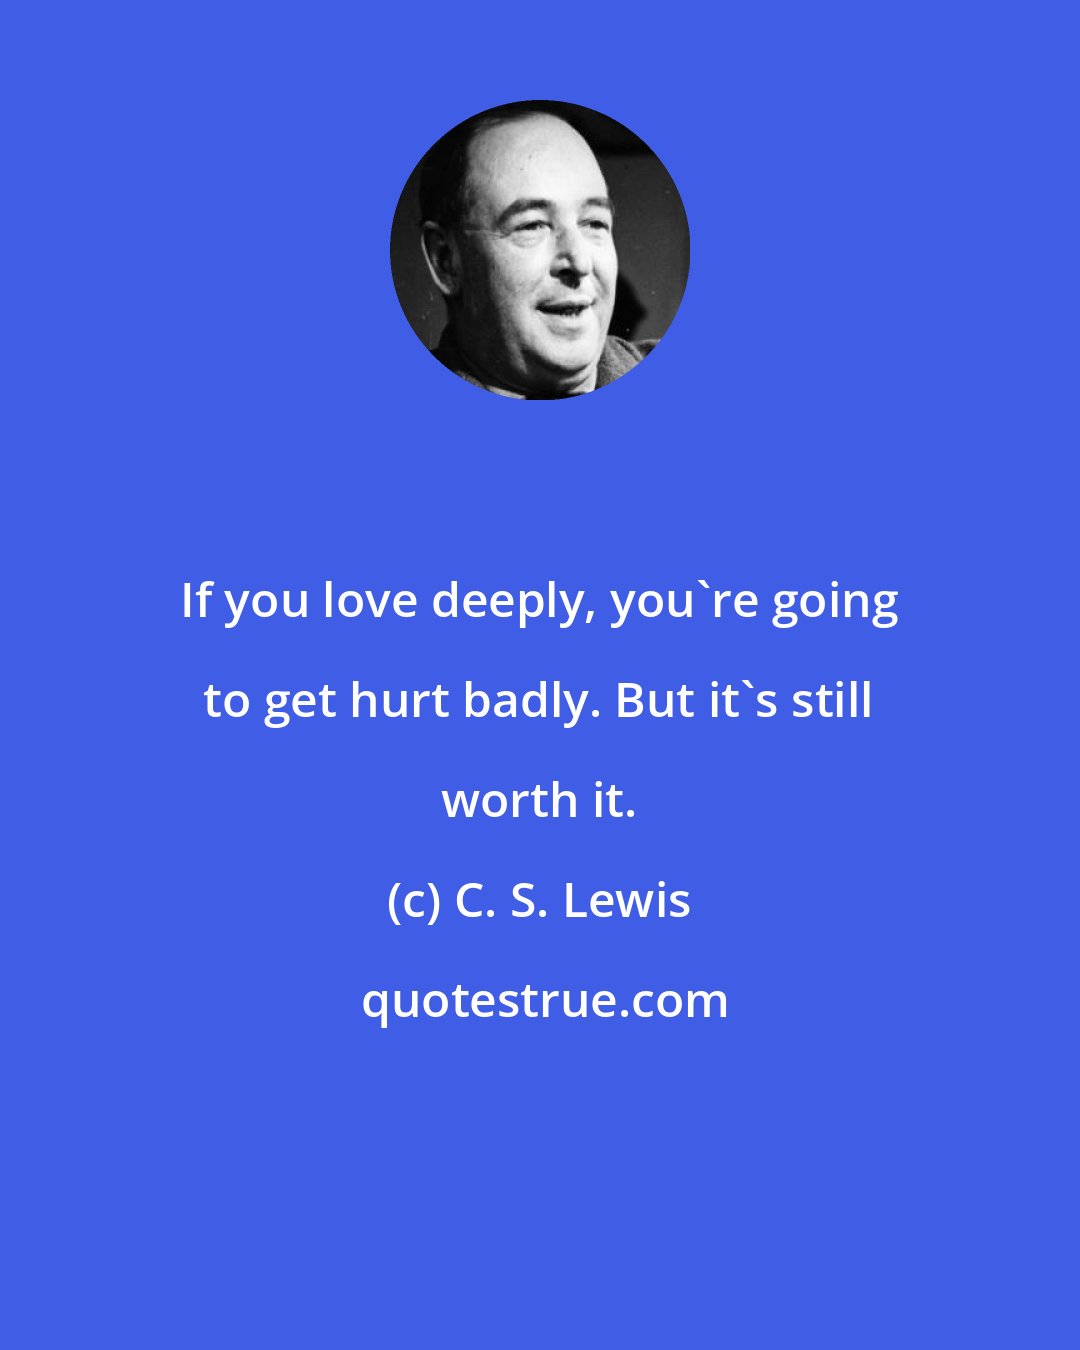 C. S. Lewis: If you love deeply, you're going to get hurt badly. But it's still worth it.